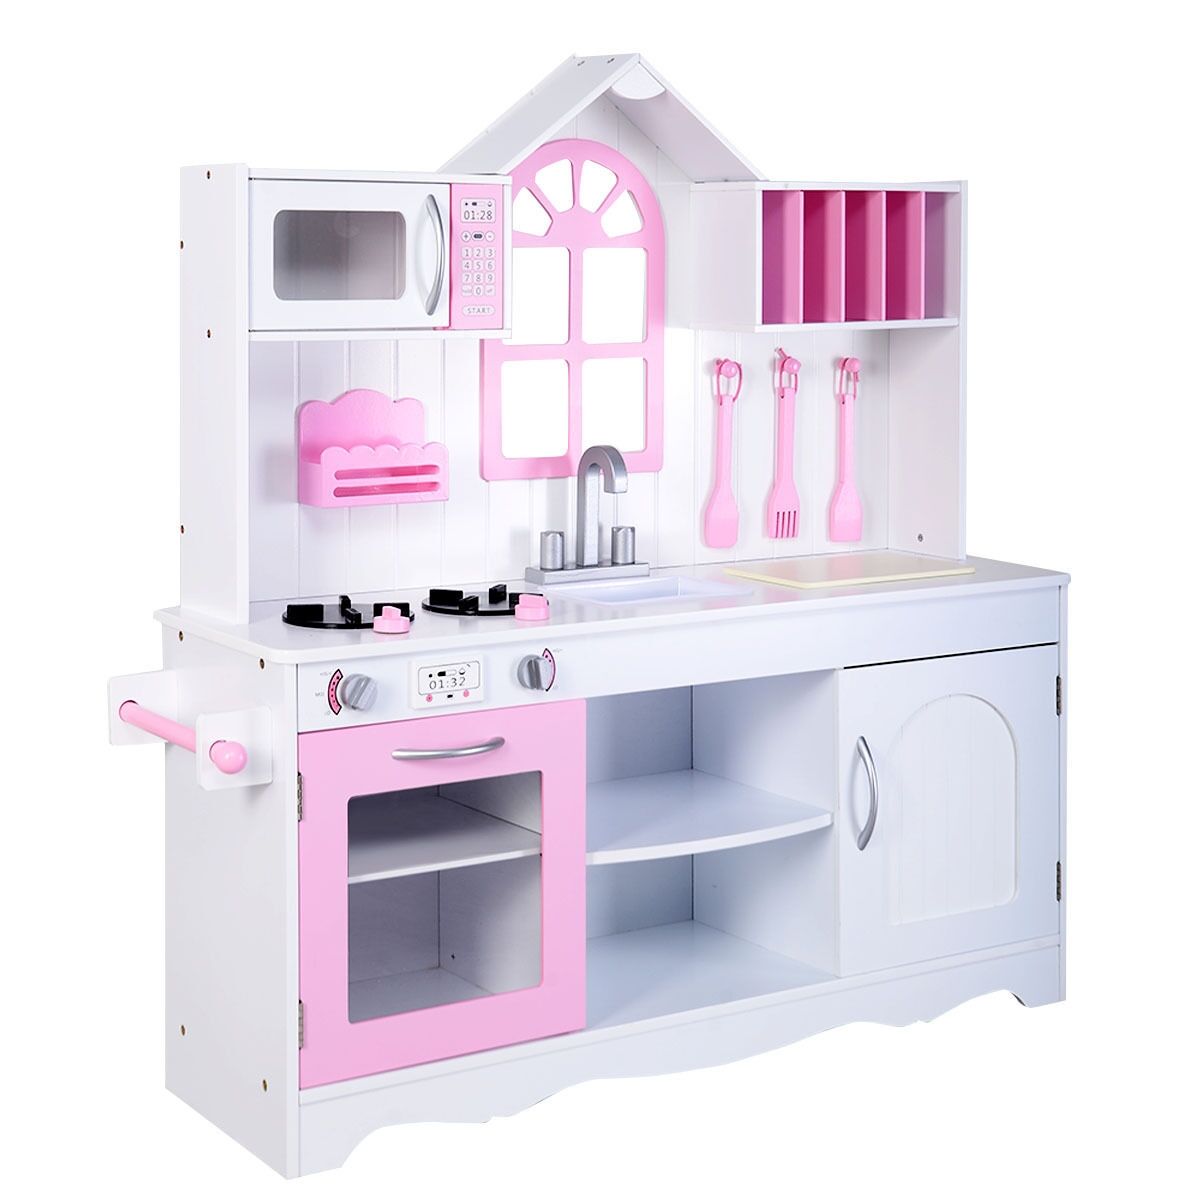 Costway Kids Wood Kitchen Toy Cooking Pretend Play Set Toddler Wooden Playset - White